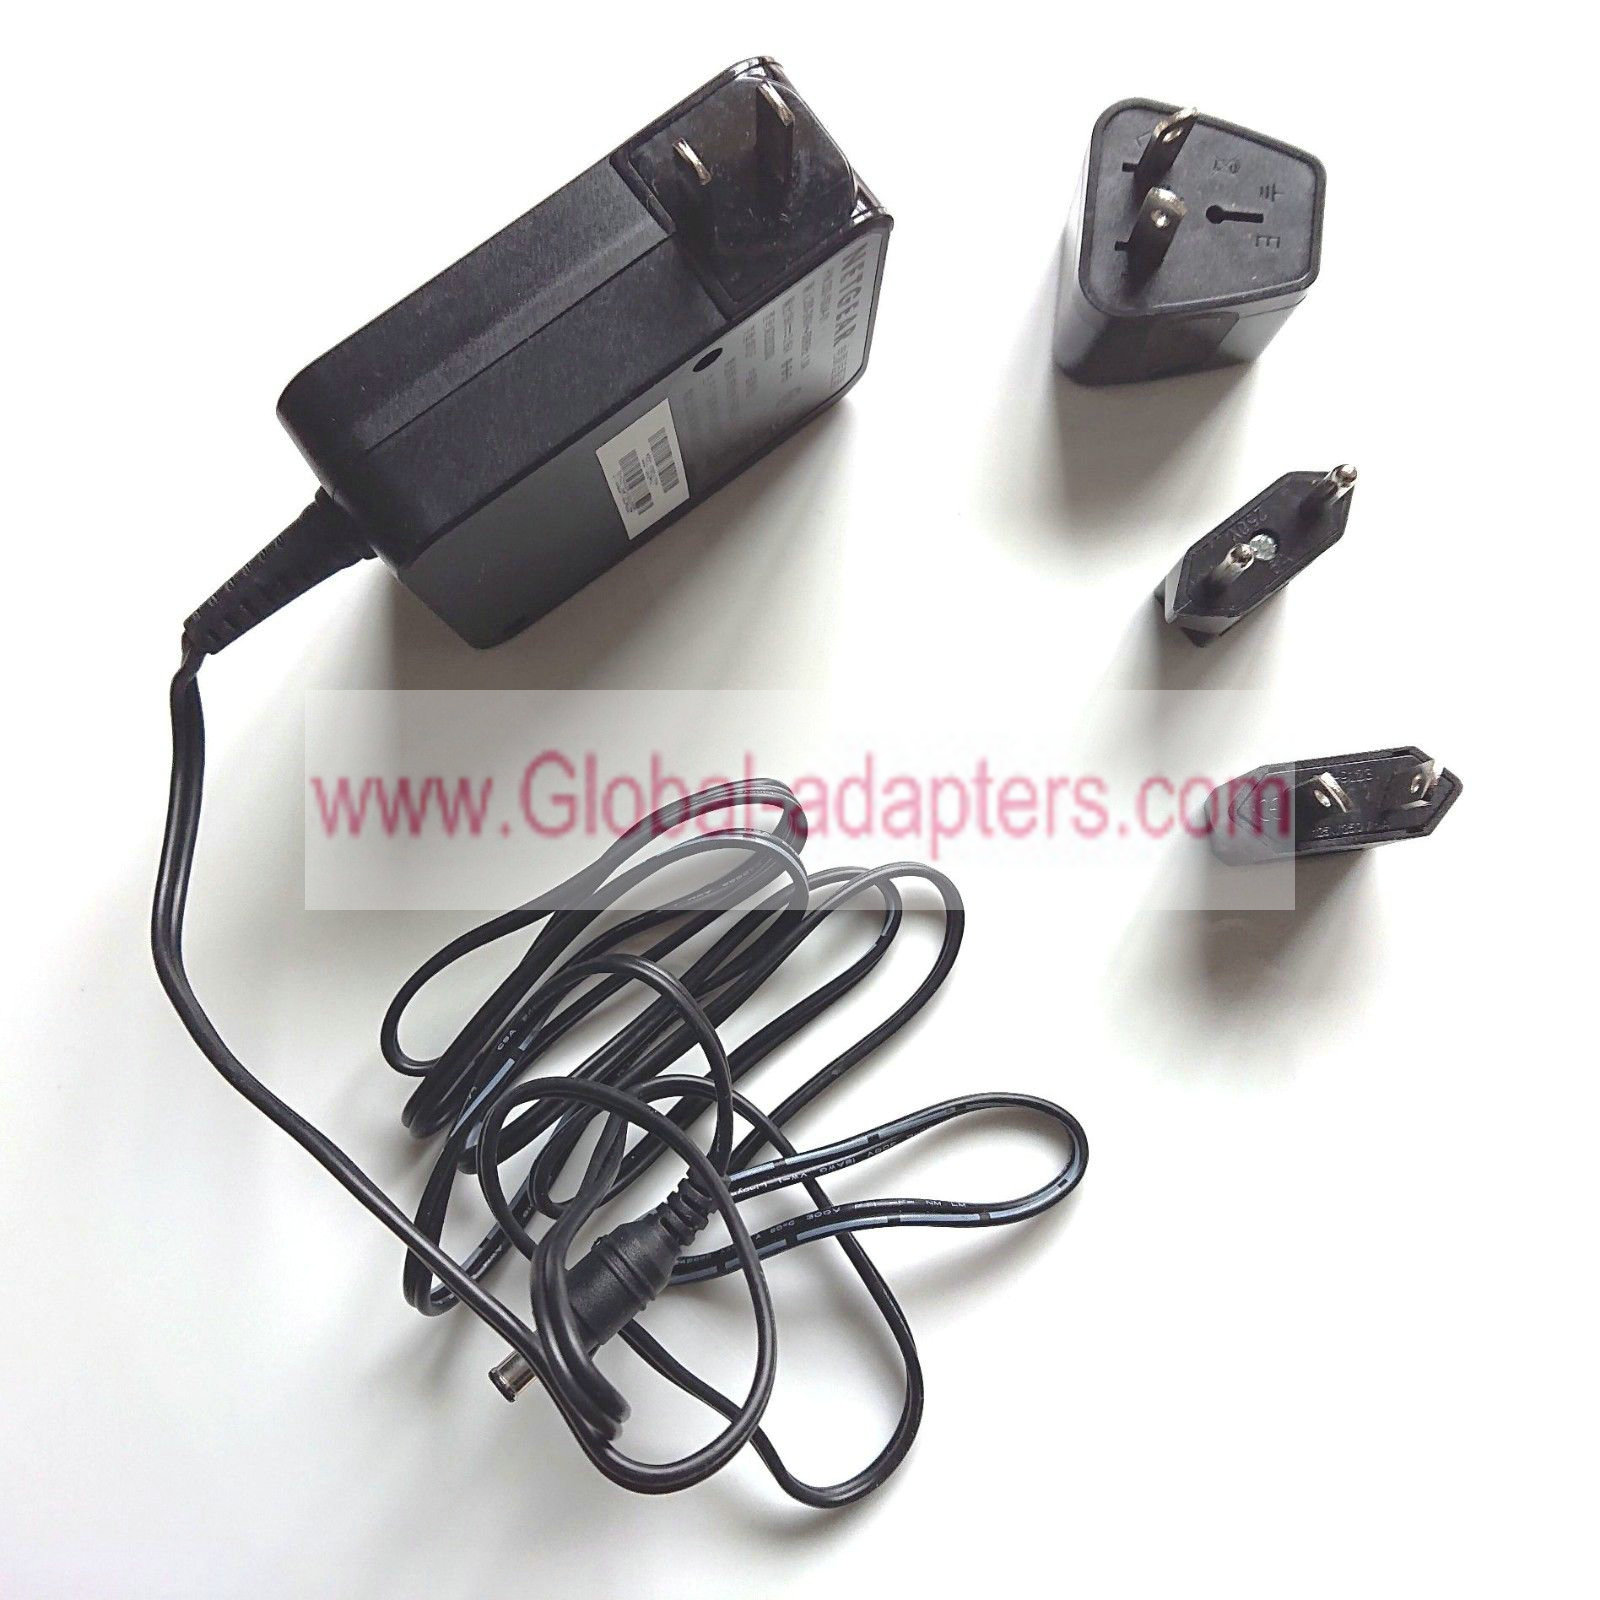 New 19V 3.16A 332-10634-01 AC Adapter For NETGEAR Router AD2003000 Power Supply Cord Charger